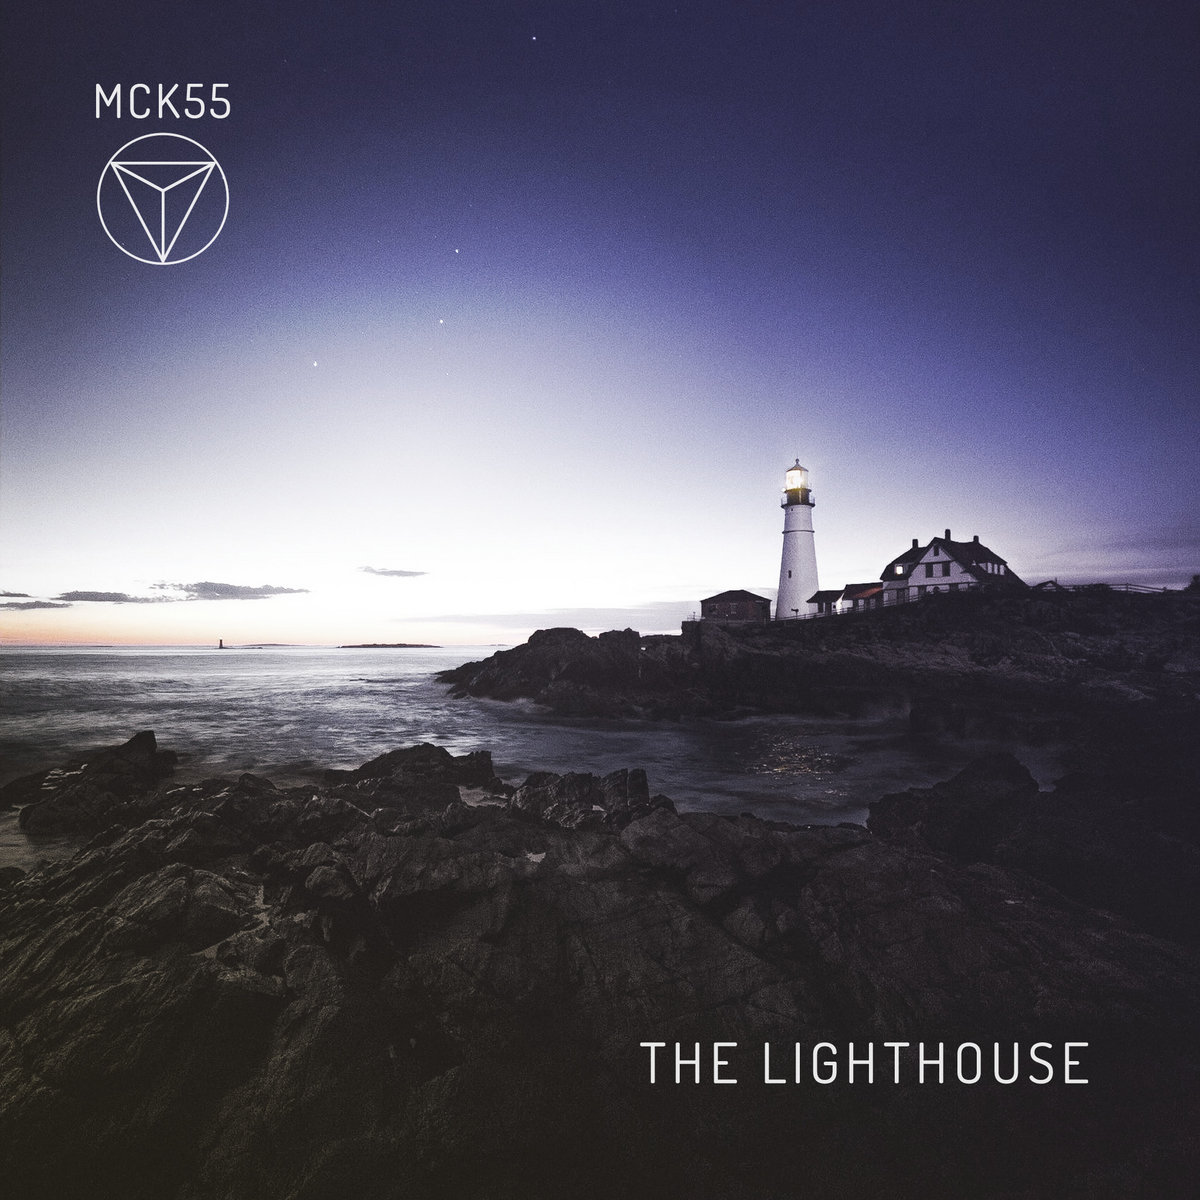 The Lighthouse by MCK55